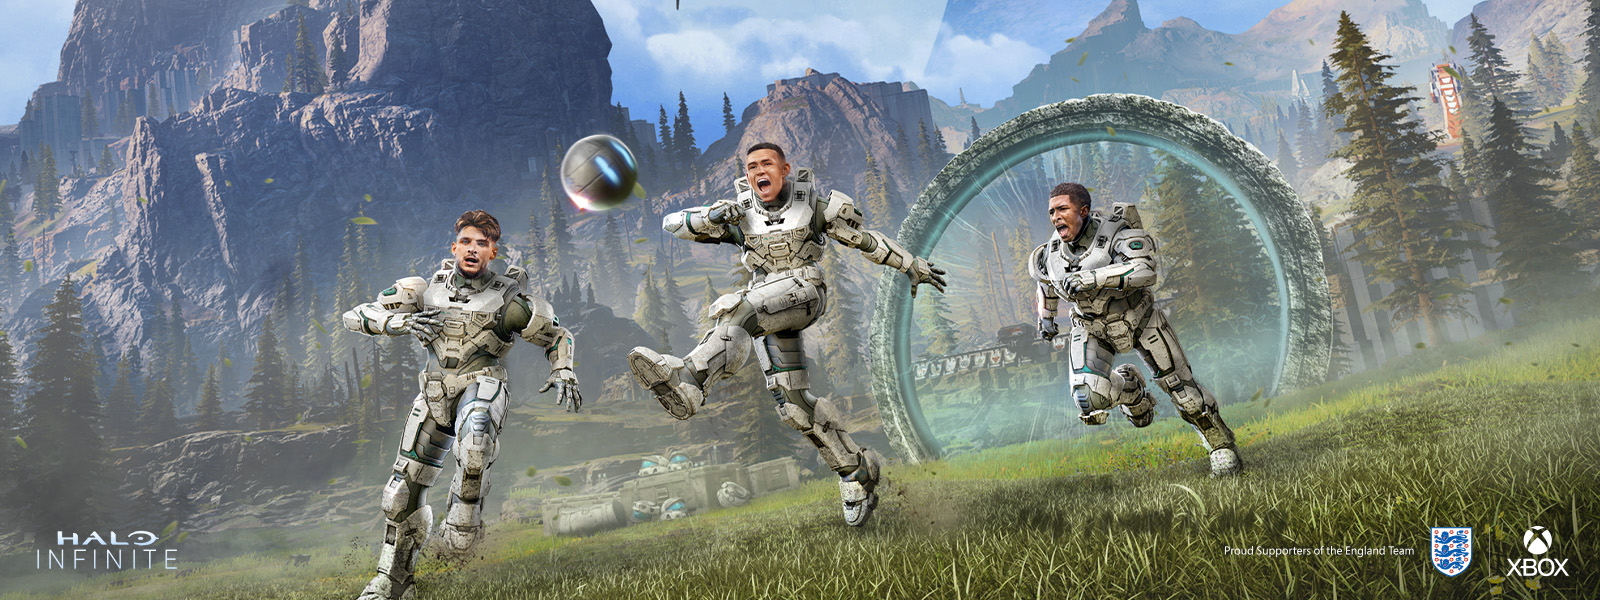 Several players from the English football team, kitted out in Spartan Armour, kicking a ball on the Halo ring from Halo Infinite. The FA and Xbox logos can be seen on the bottom right of the image, and the Halo Infinite logo, on the bottom left